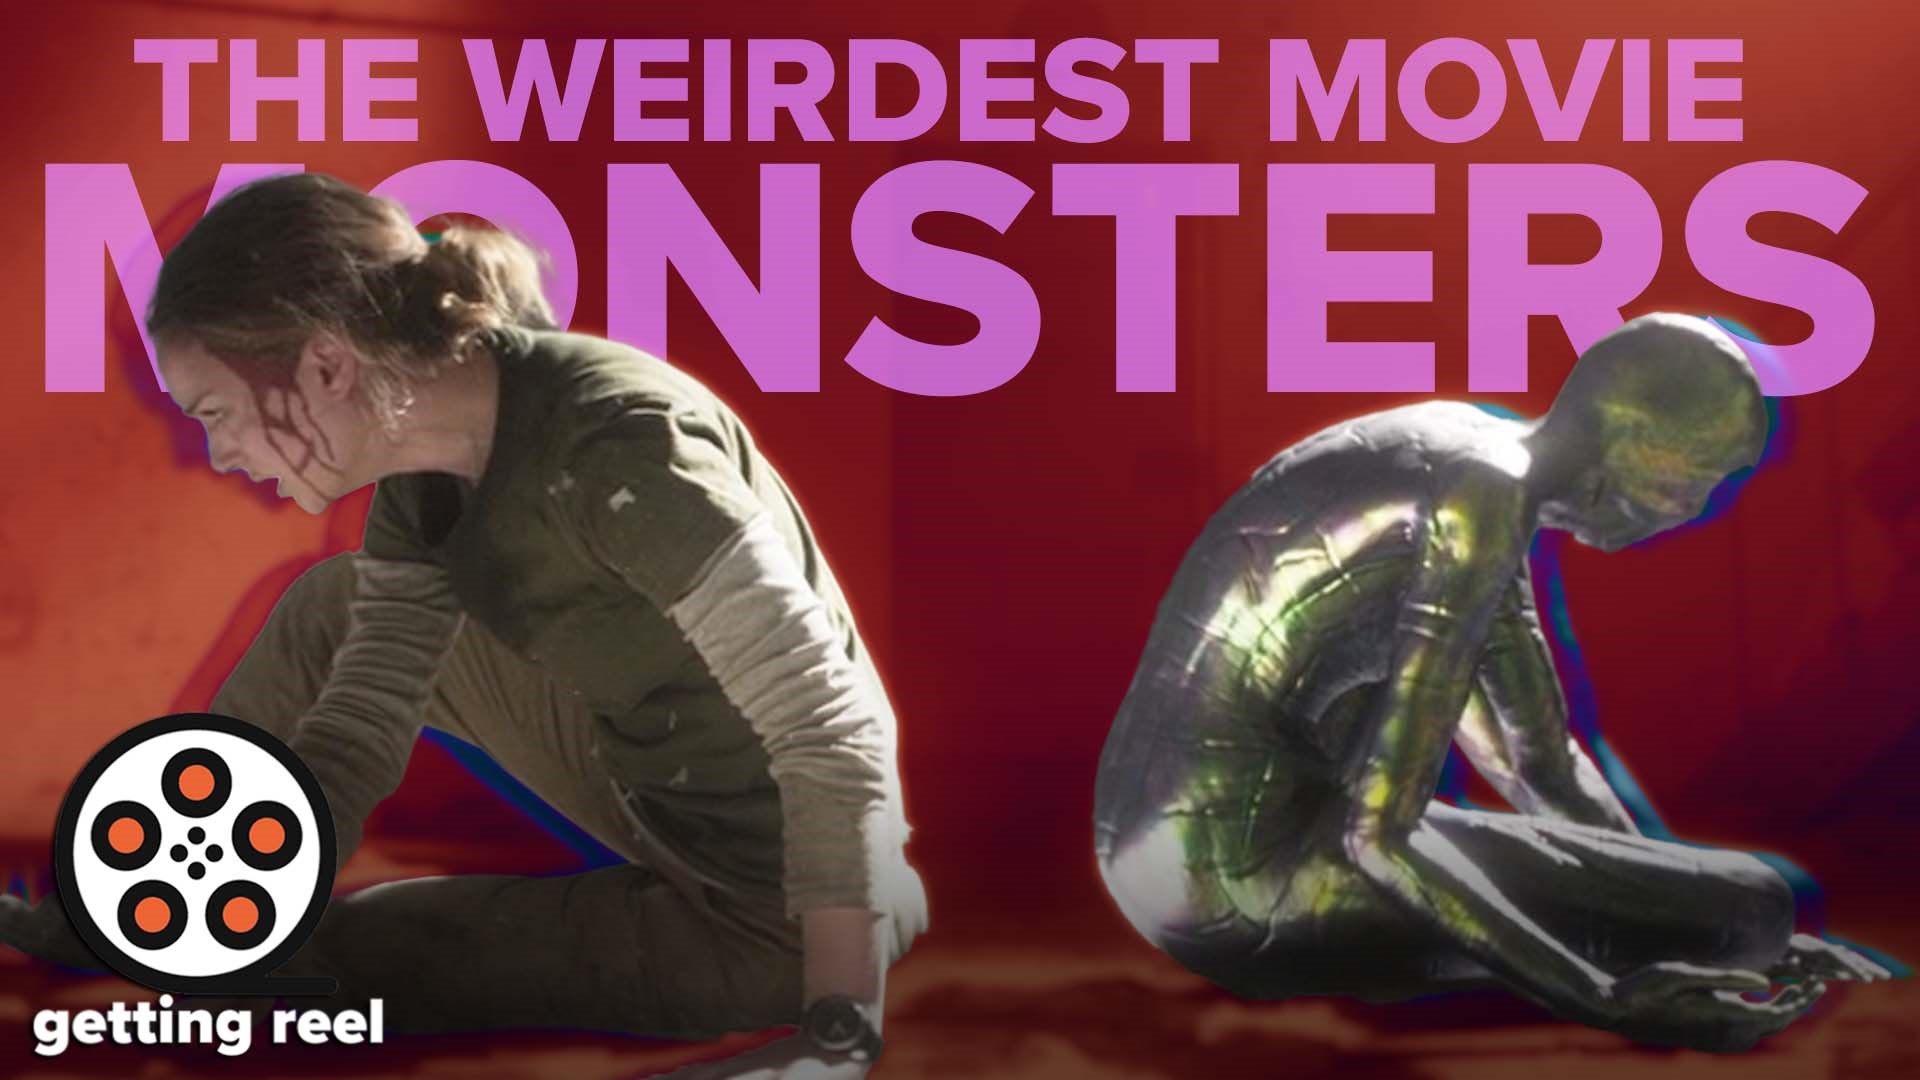 We all know of the iconic movie monsters, but have ever considered how weird some of the other monsters are?